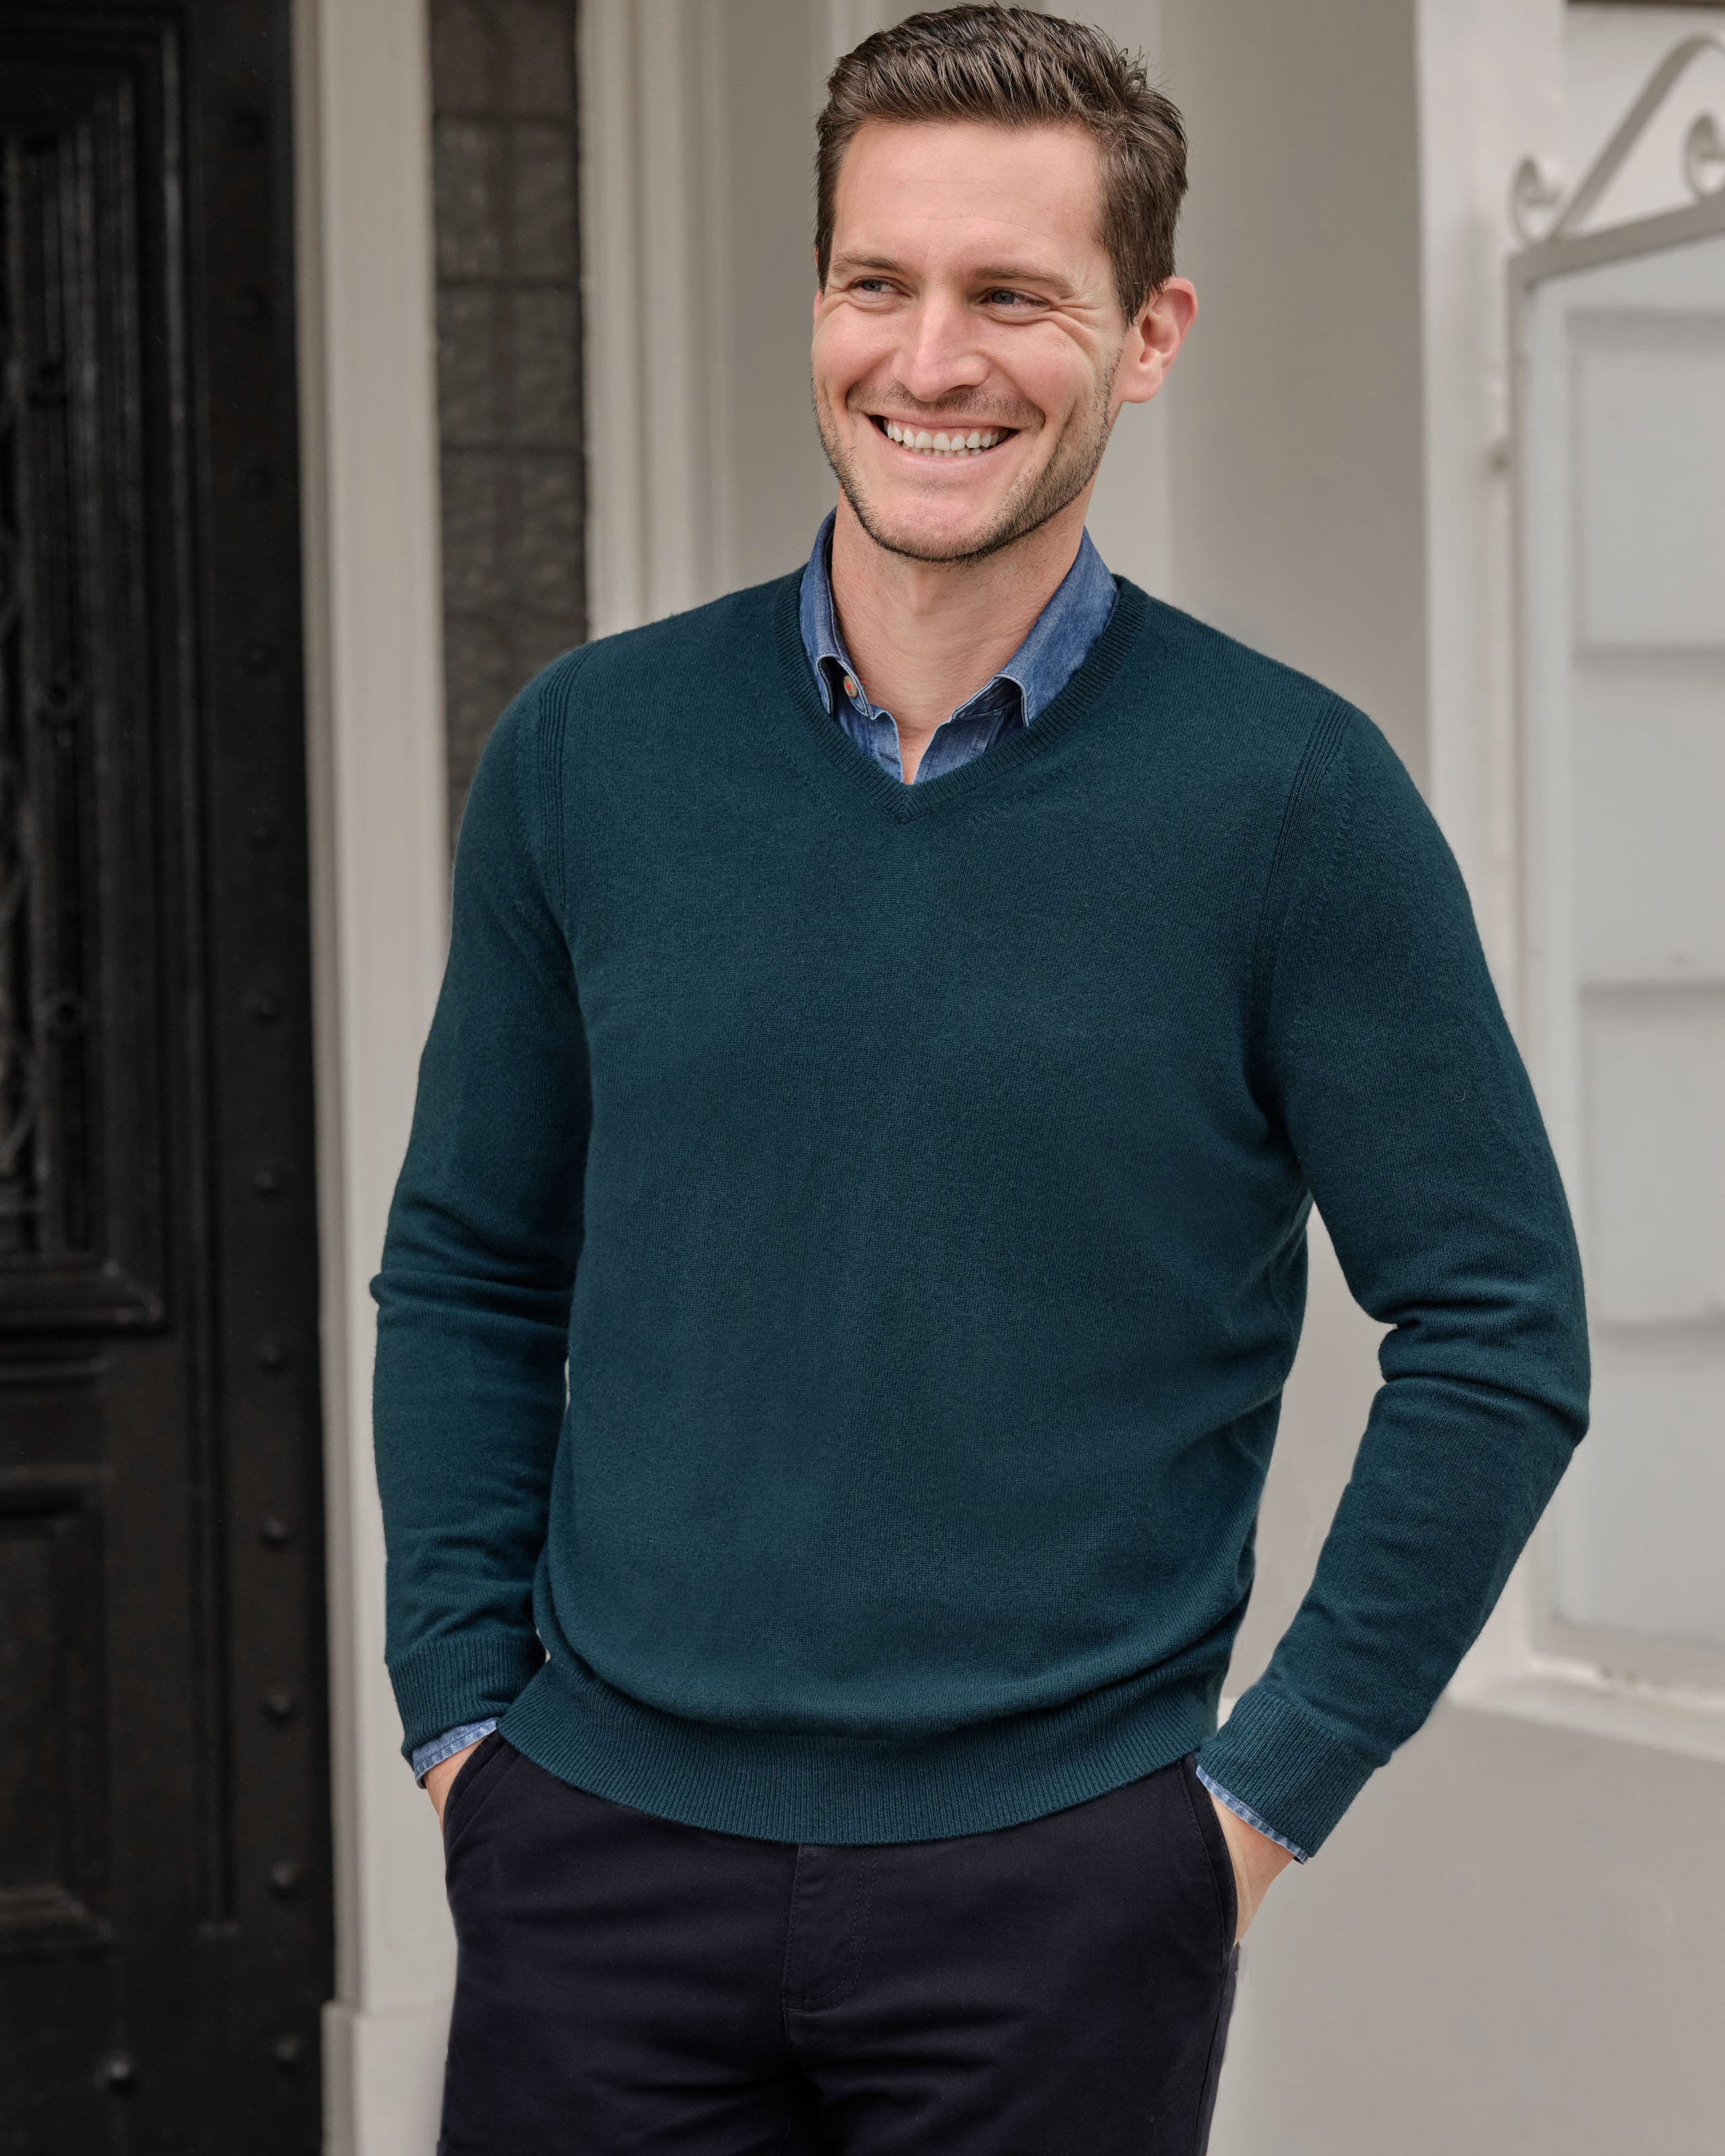 Mens Wool Jumpers and Knitted Sweaters | WoolOvers UK - Page 2